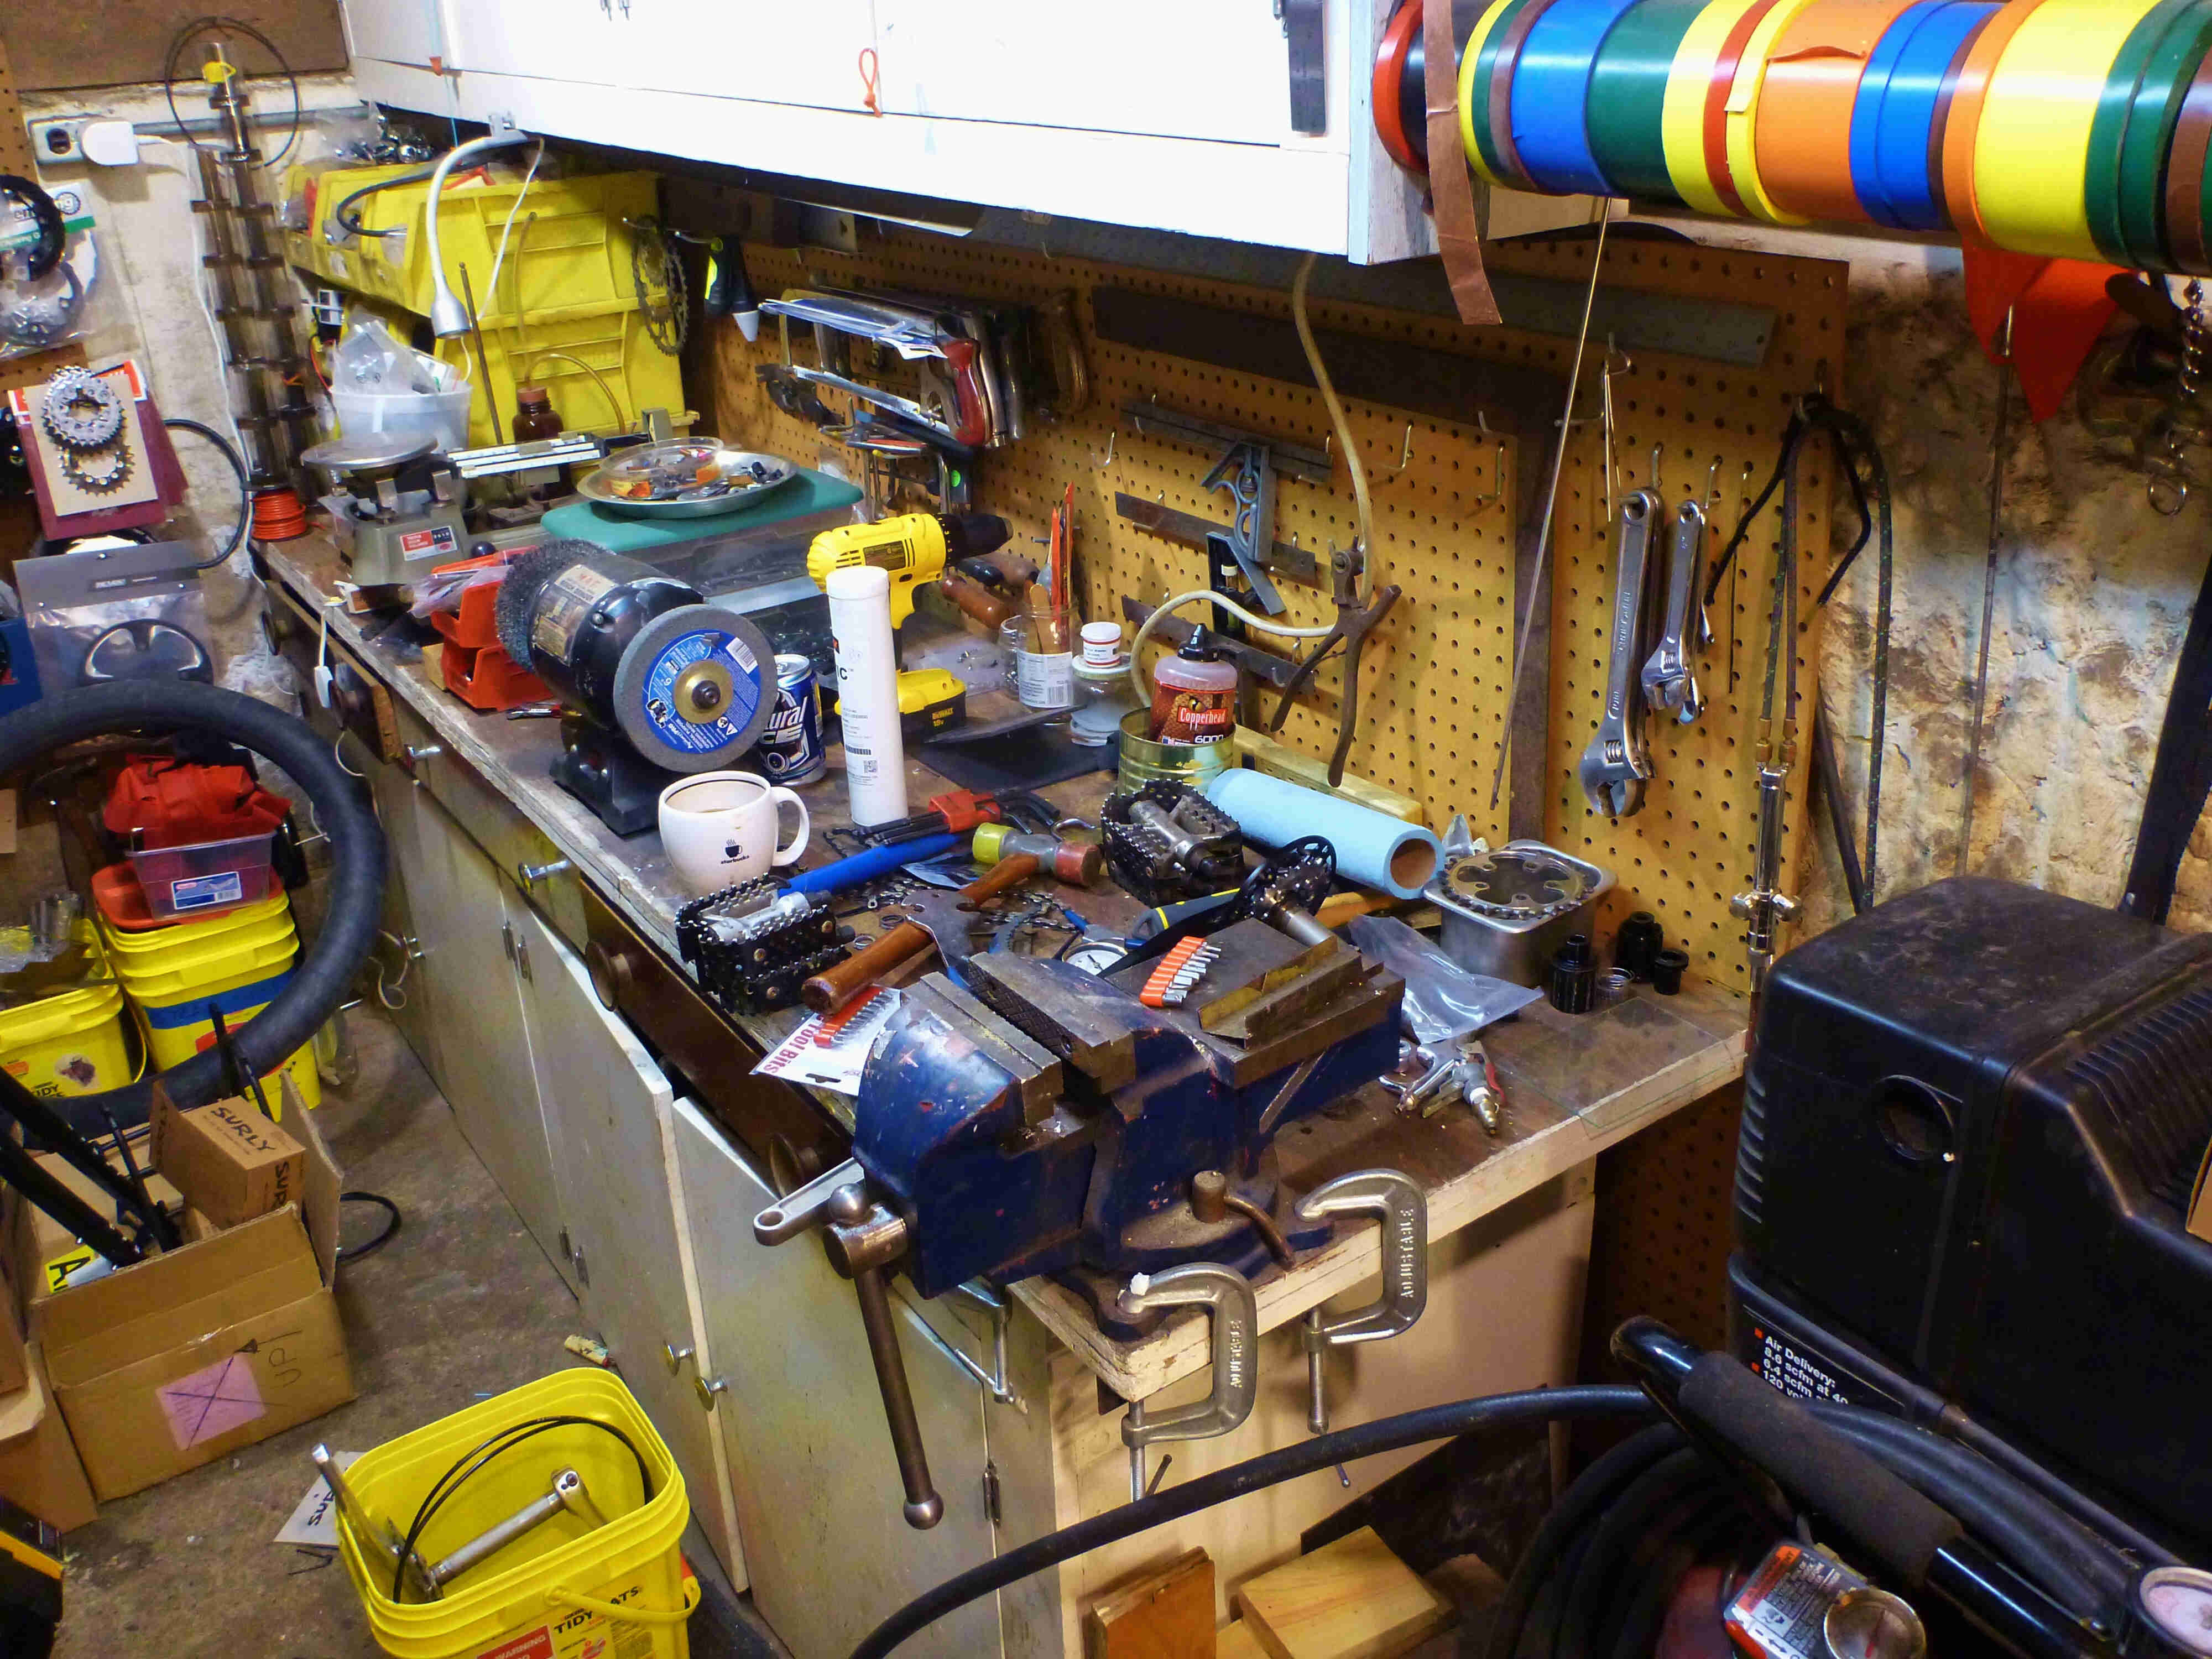 A workbench, in a workshop, with a vise, a grinder mounted to it, and bike parts laying all around